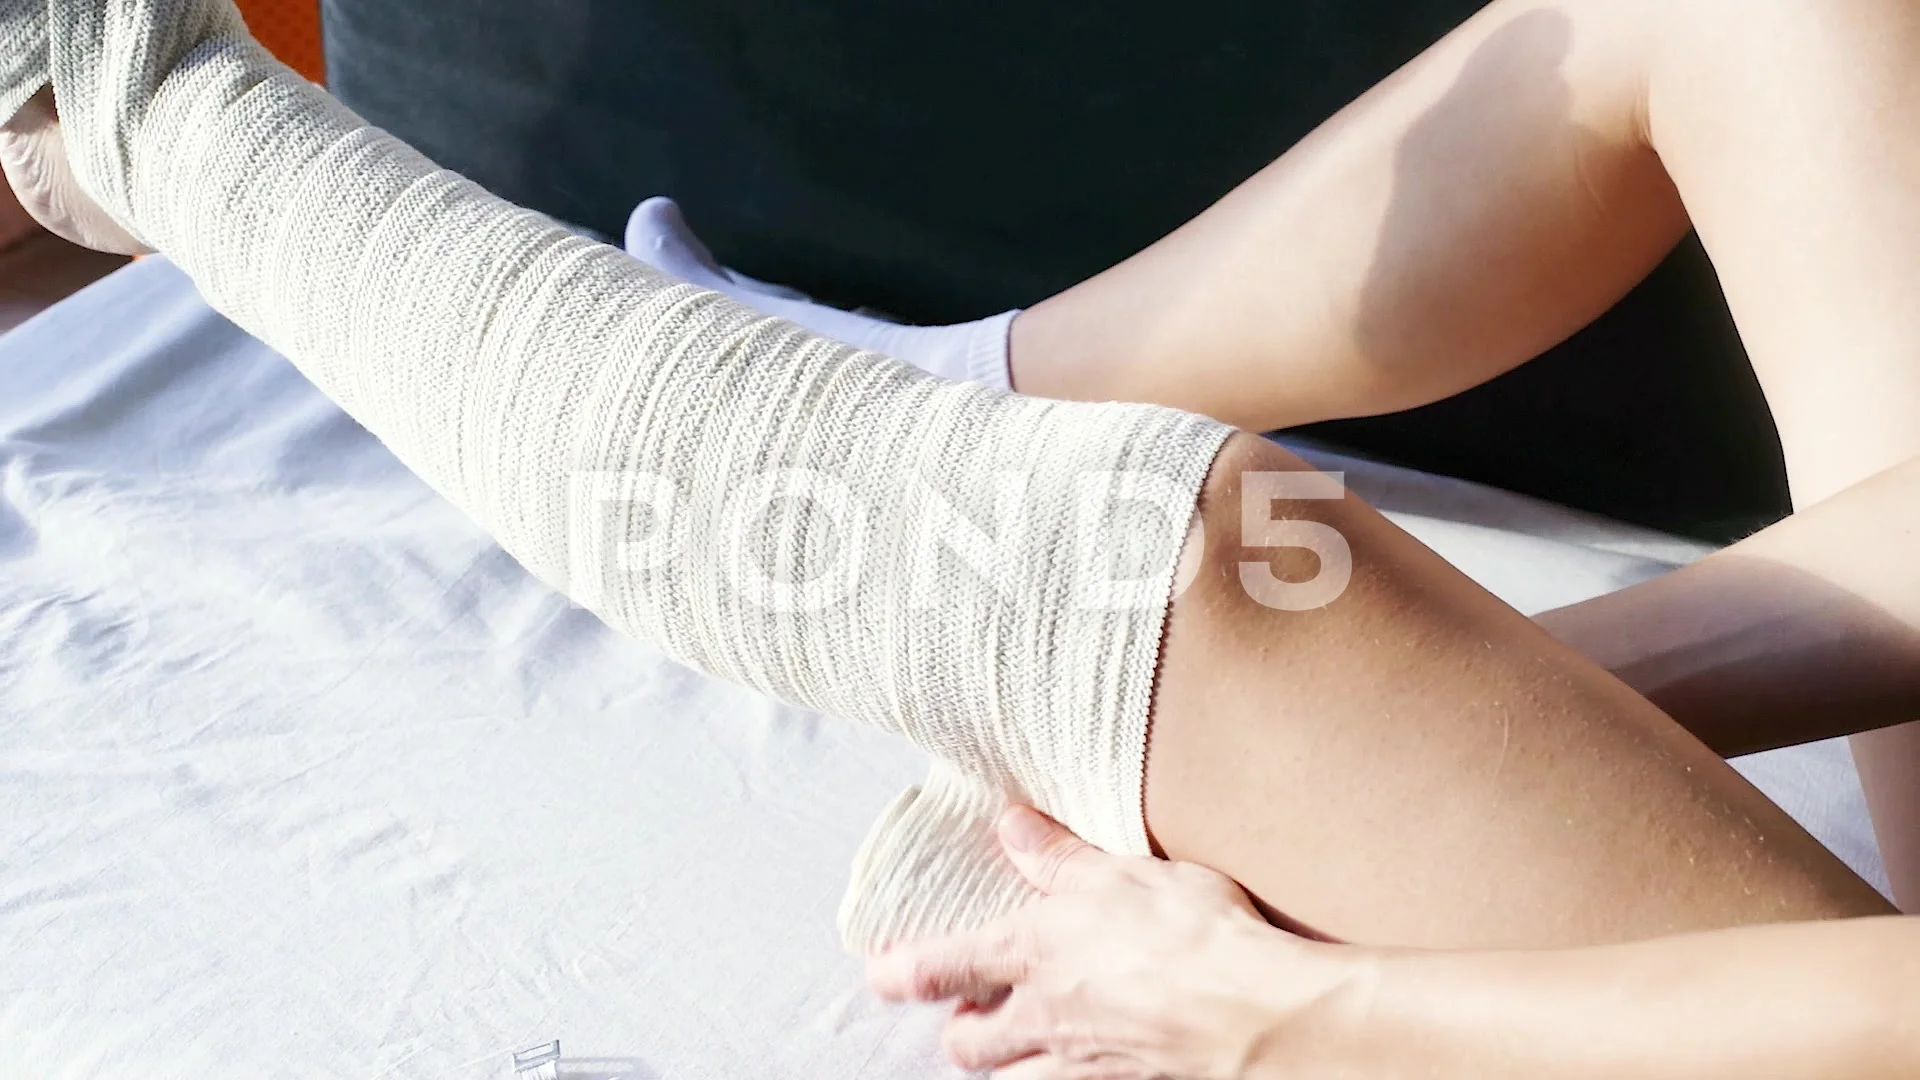 Female wearing knee orthosis or knee support brace after surgery